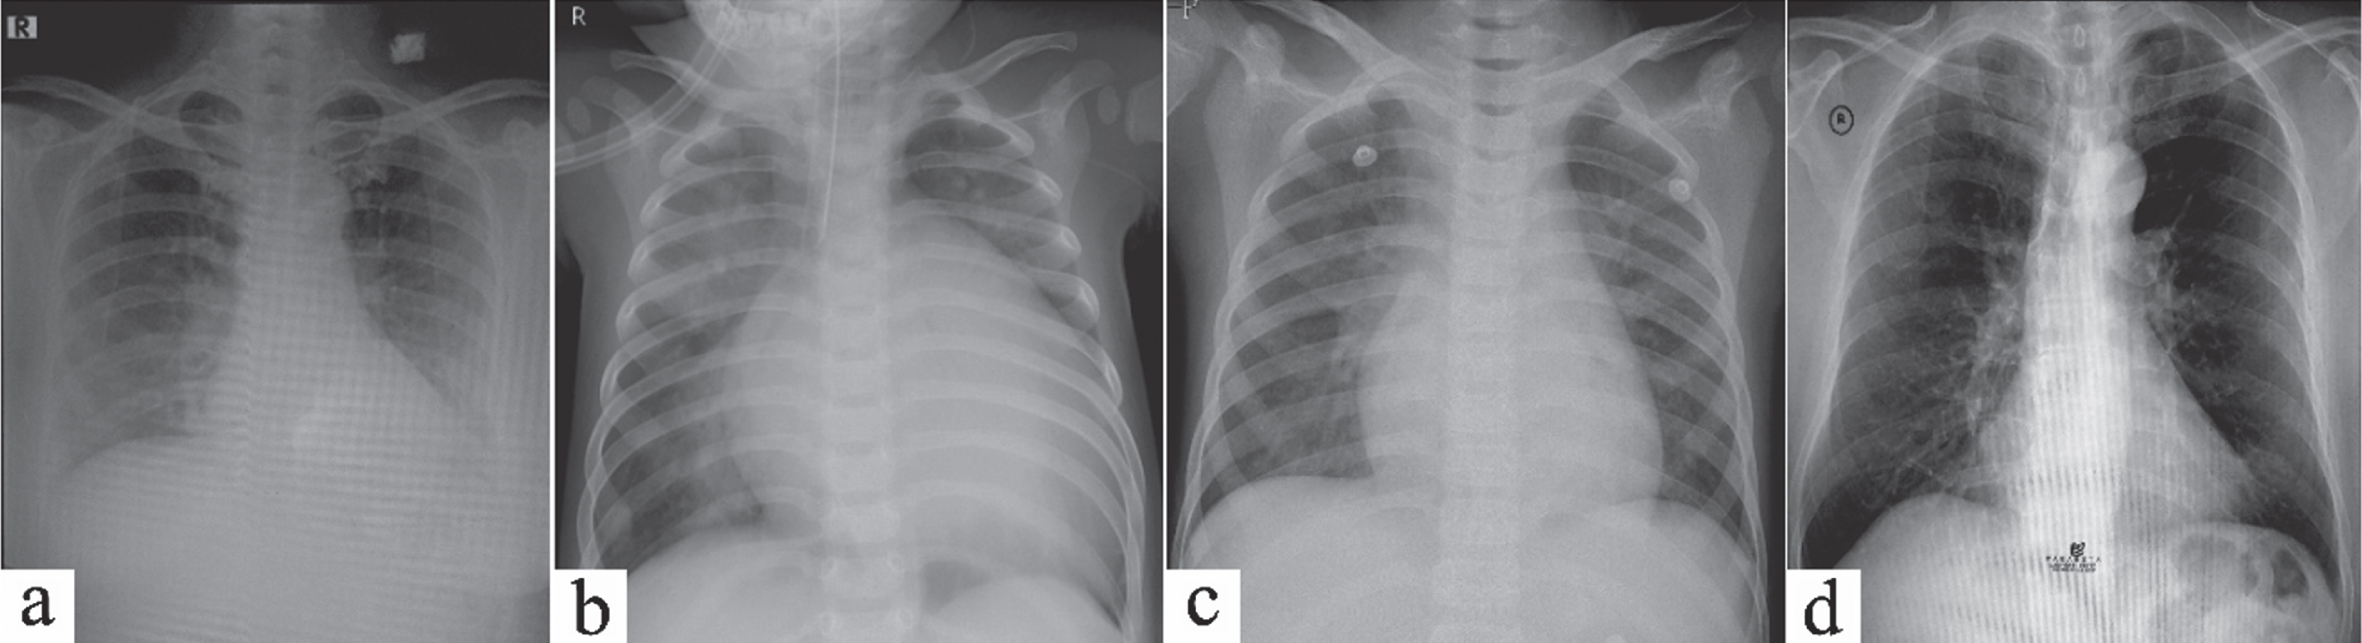 Chest X-ray image of: (a) Viral pneumonia and Positif COVID-19, (b) Bacterial pneumonia, (c) Viral pneumonia (negative COVID-19), and (d) Normal X-ray image.